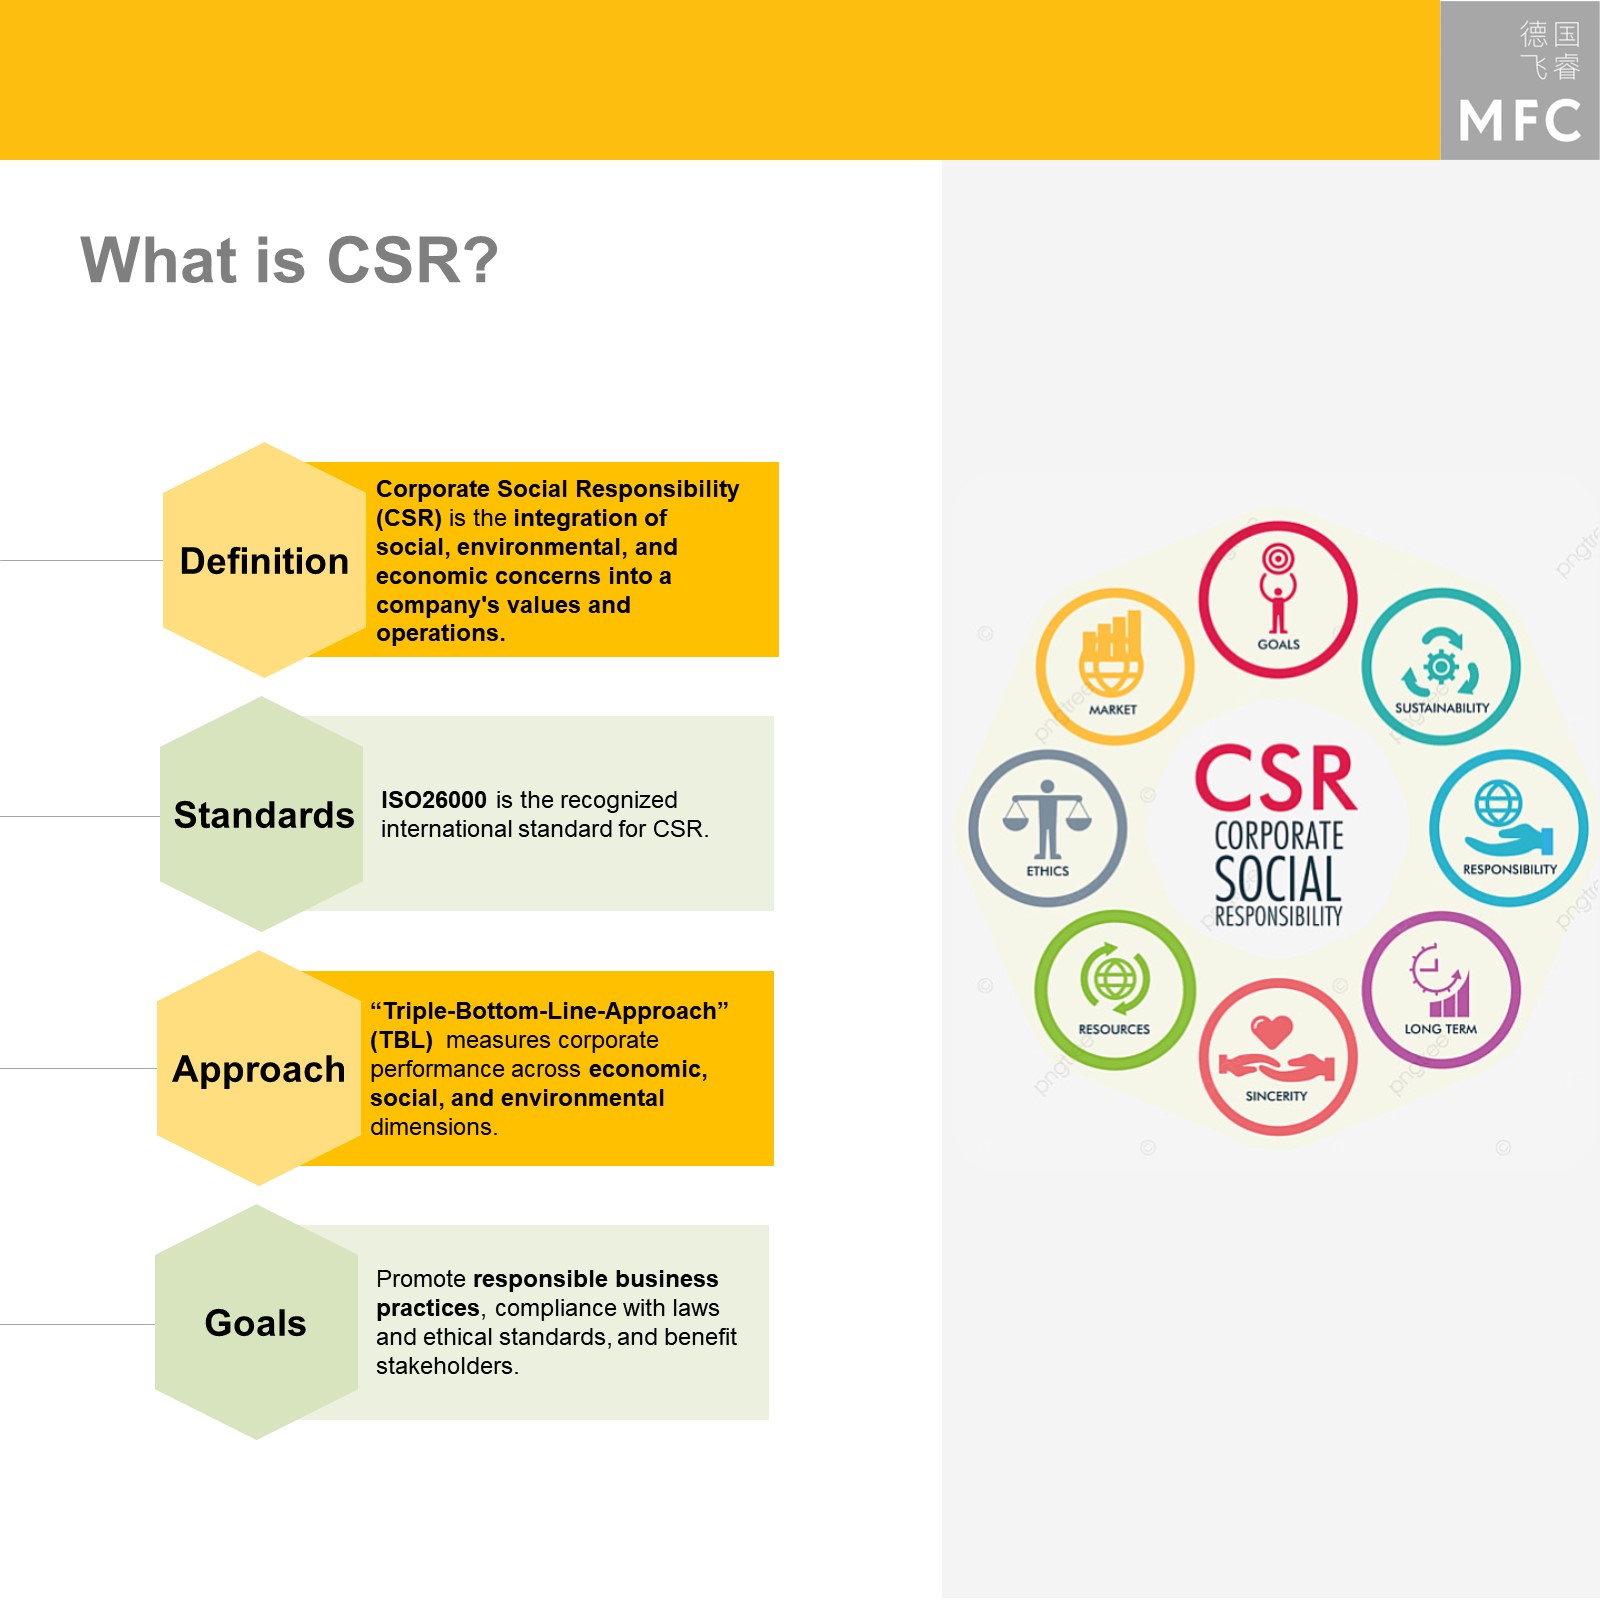 Graphic on Corporate Social Responsibility (CSR): Definition, Standards, Approach, Goals